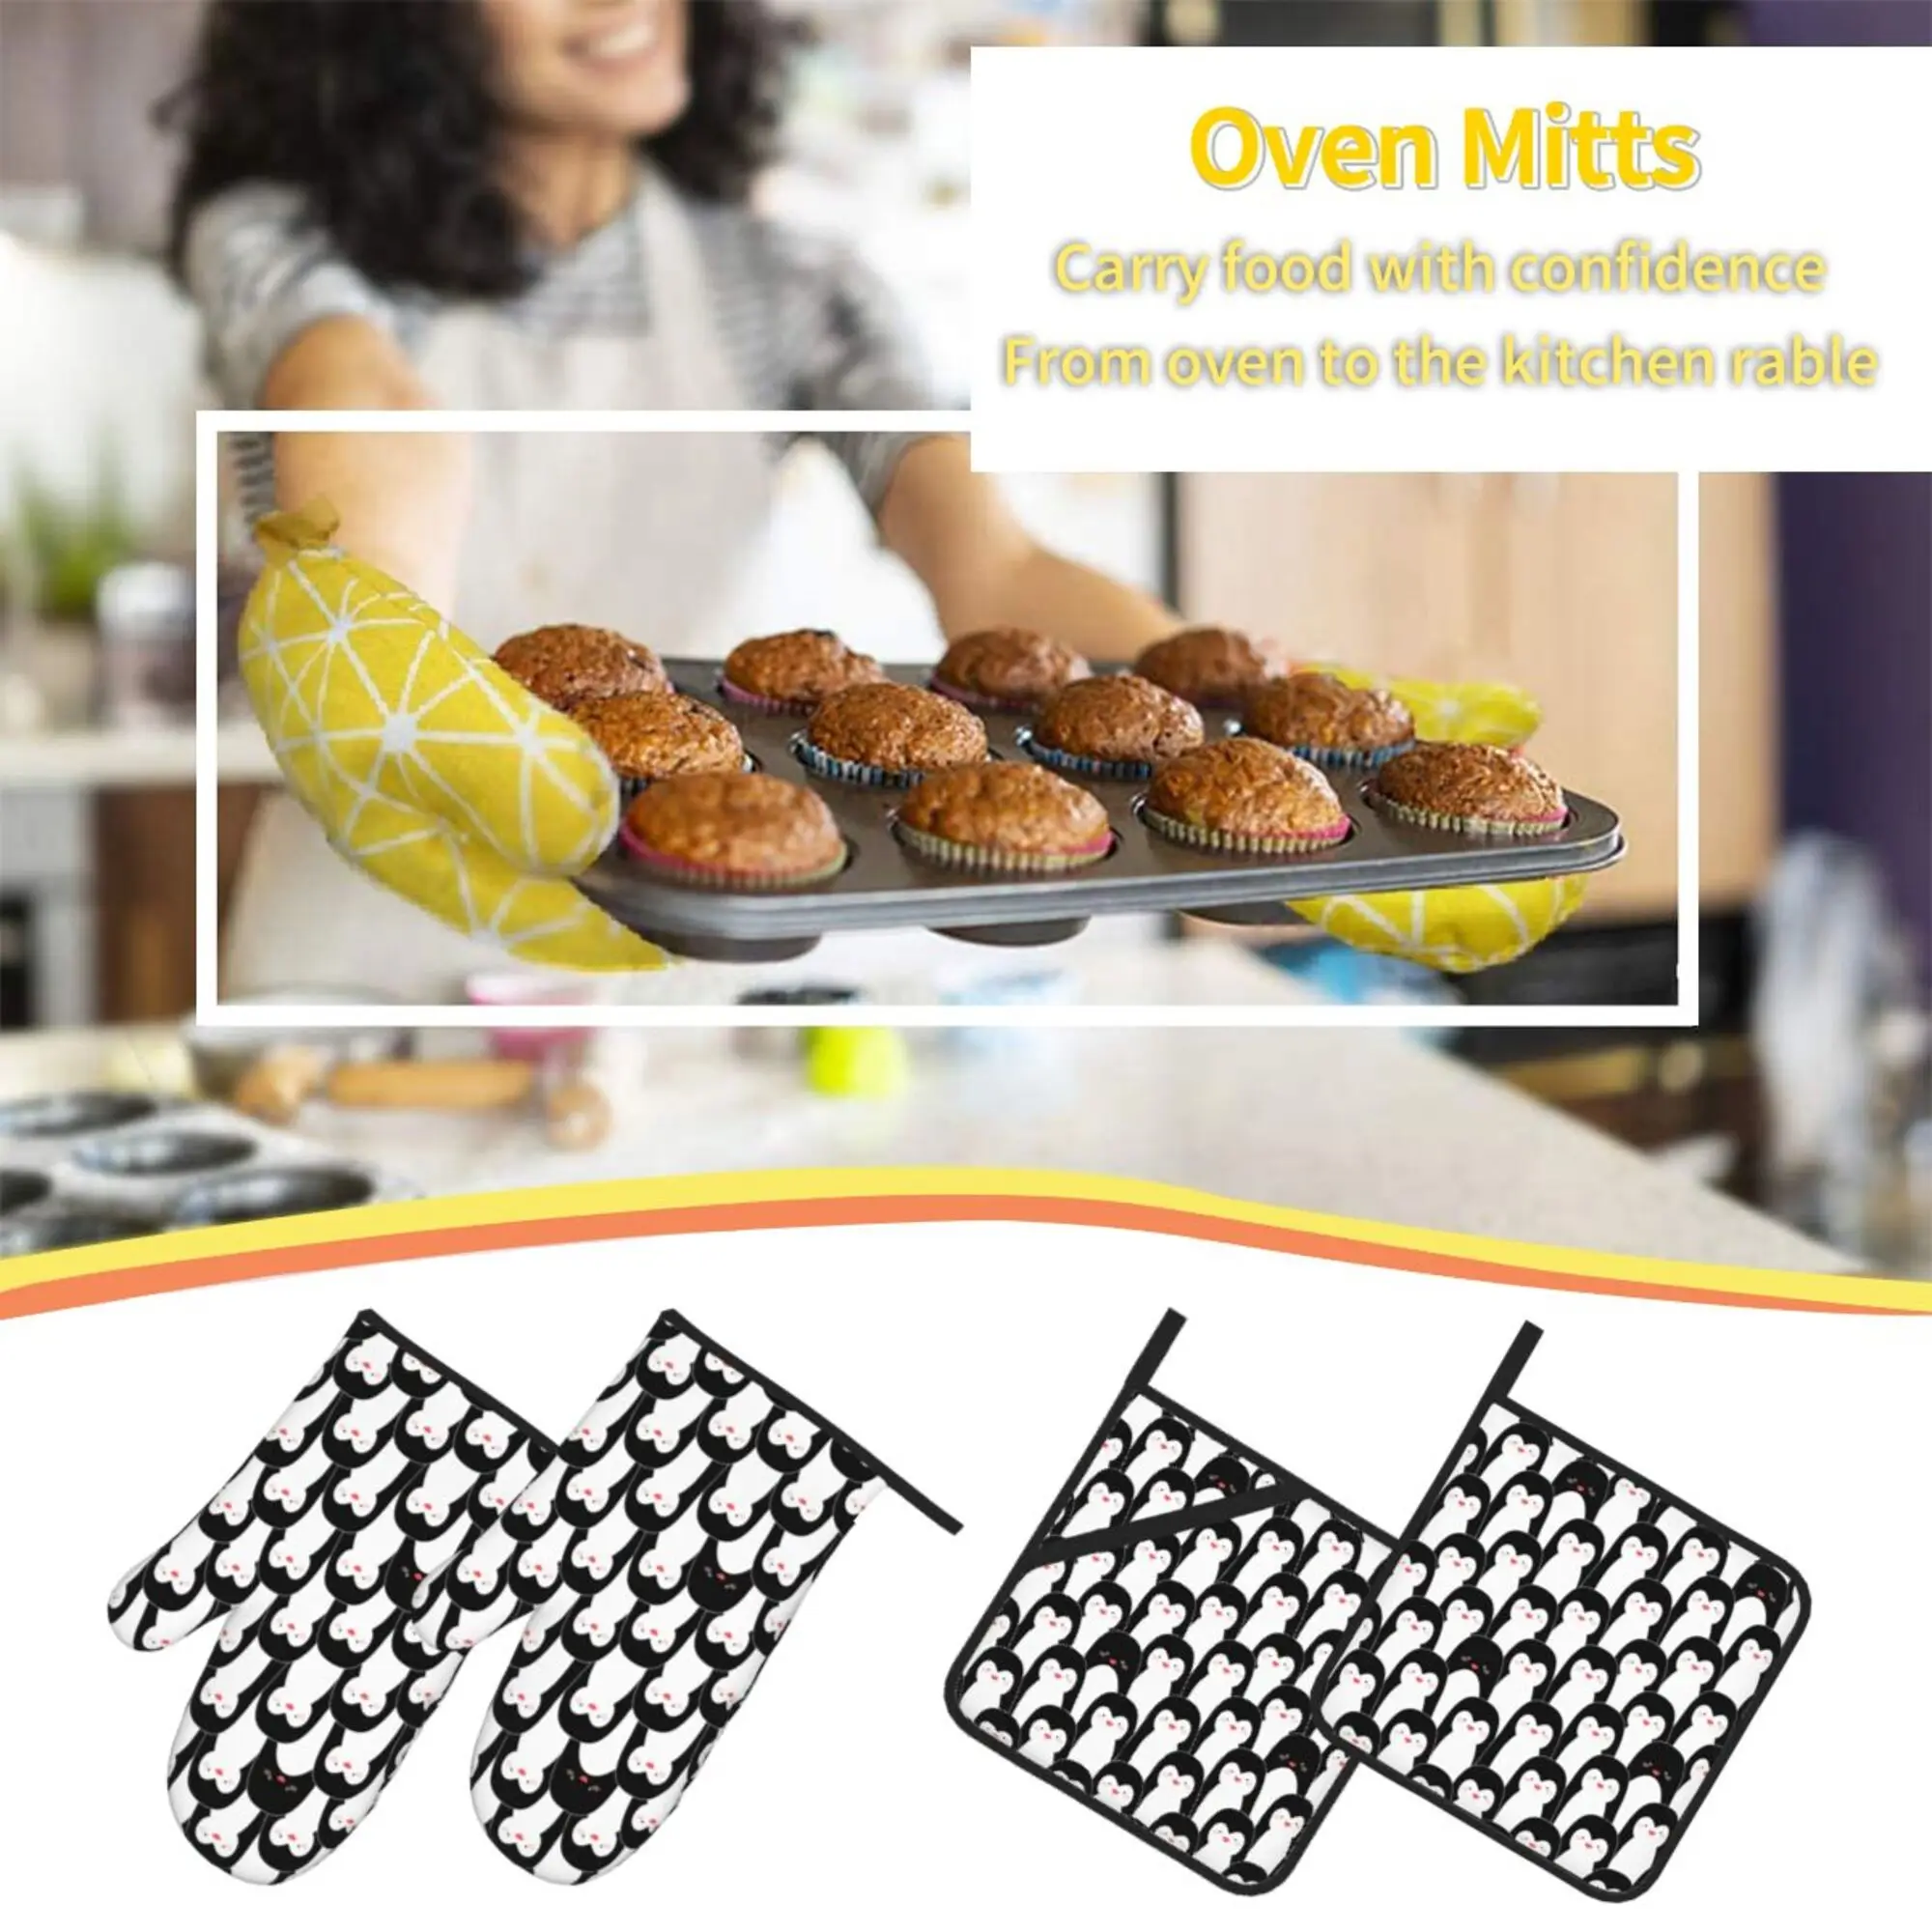 https://ae01.alicdn.com/kf/S7846ddb330ad40e6b09fab59b10f18cdL/Cute-Penguin-Oven-Mitts-and-Pot-Holders-Sets-of-4-Resistant-Hot-Pads-Non-Slip-Cotton.jpg